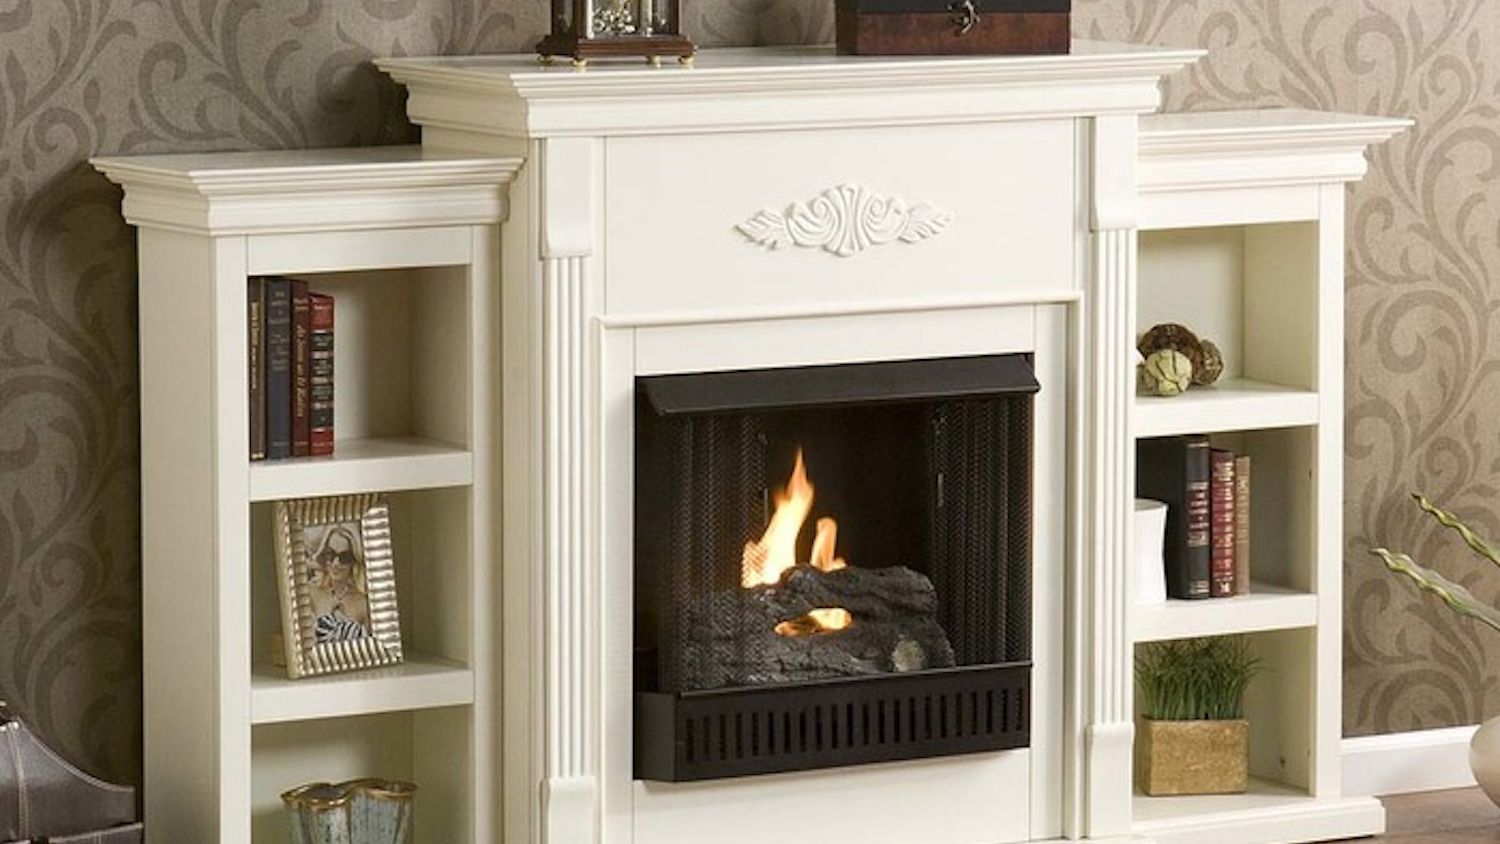 Real Flame Gel Fuel Fireplace Lovely How to Use Gel Fuel Fireplaces Indoors or Outdoors